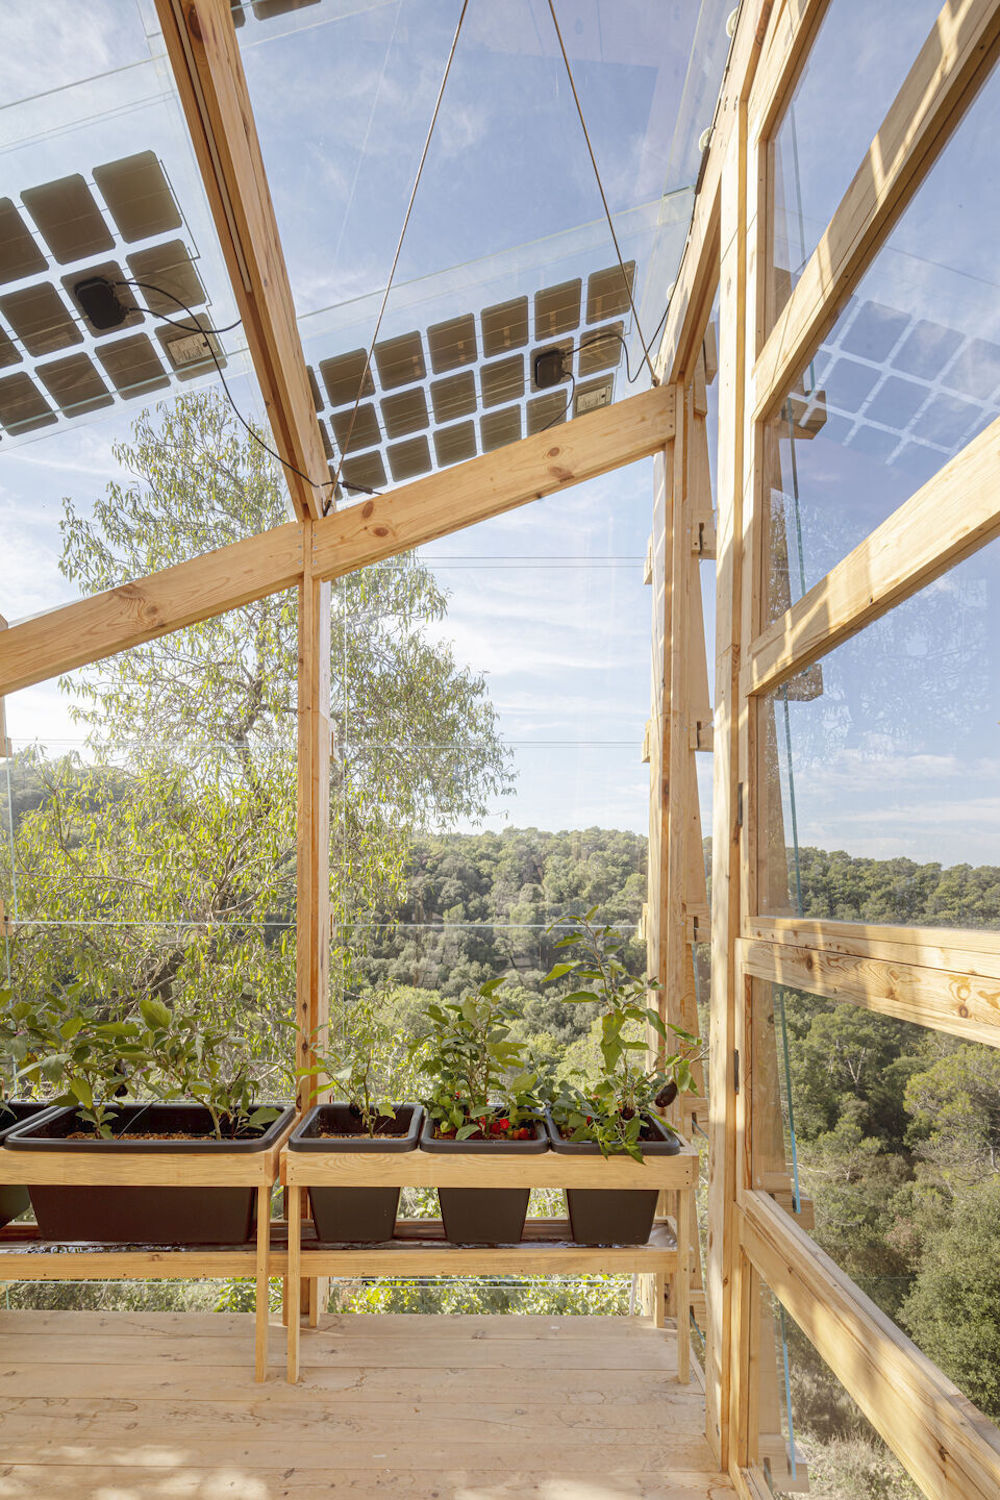 Solar Greenhouse - Self-sufficient Food Cultivation System by IAAC